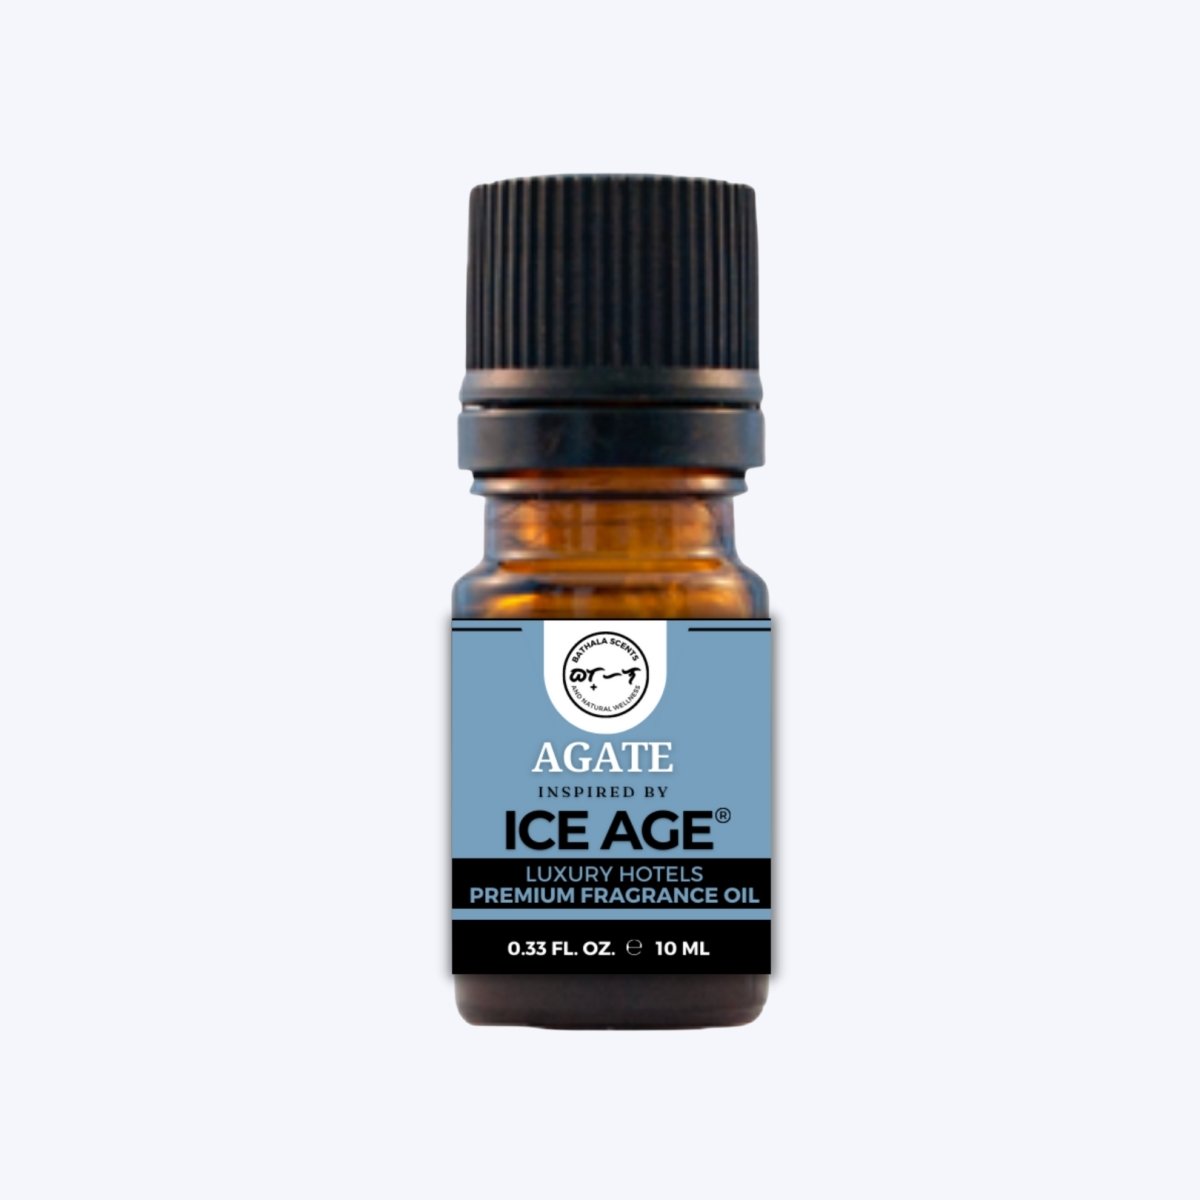 Agate Inspired by Ice Age Luxury Hotels Fragrance Oil 10ml - Bathala Scents and Natural Wellness